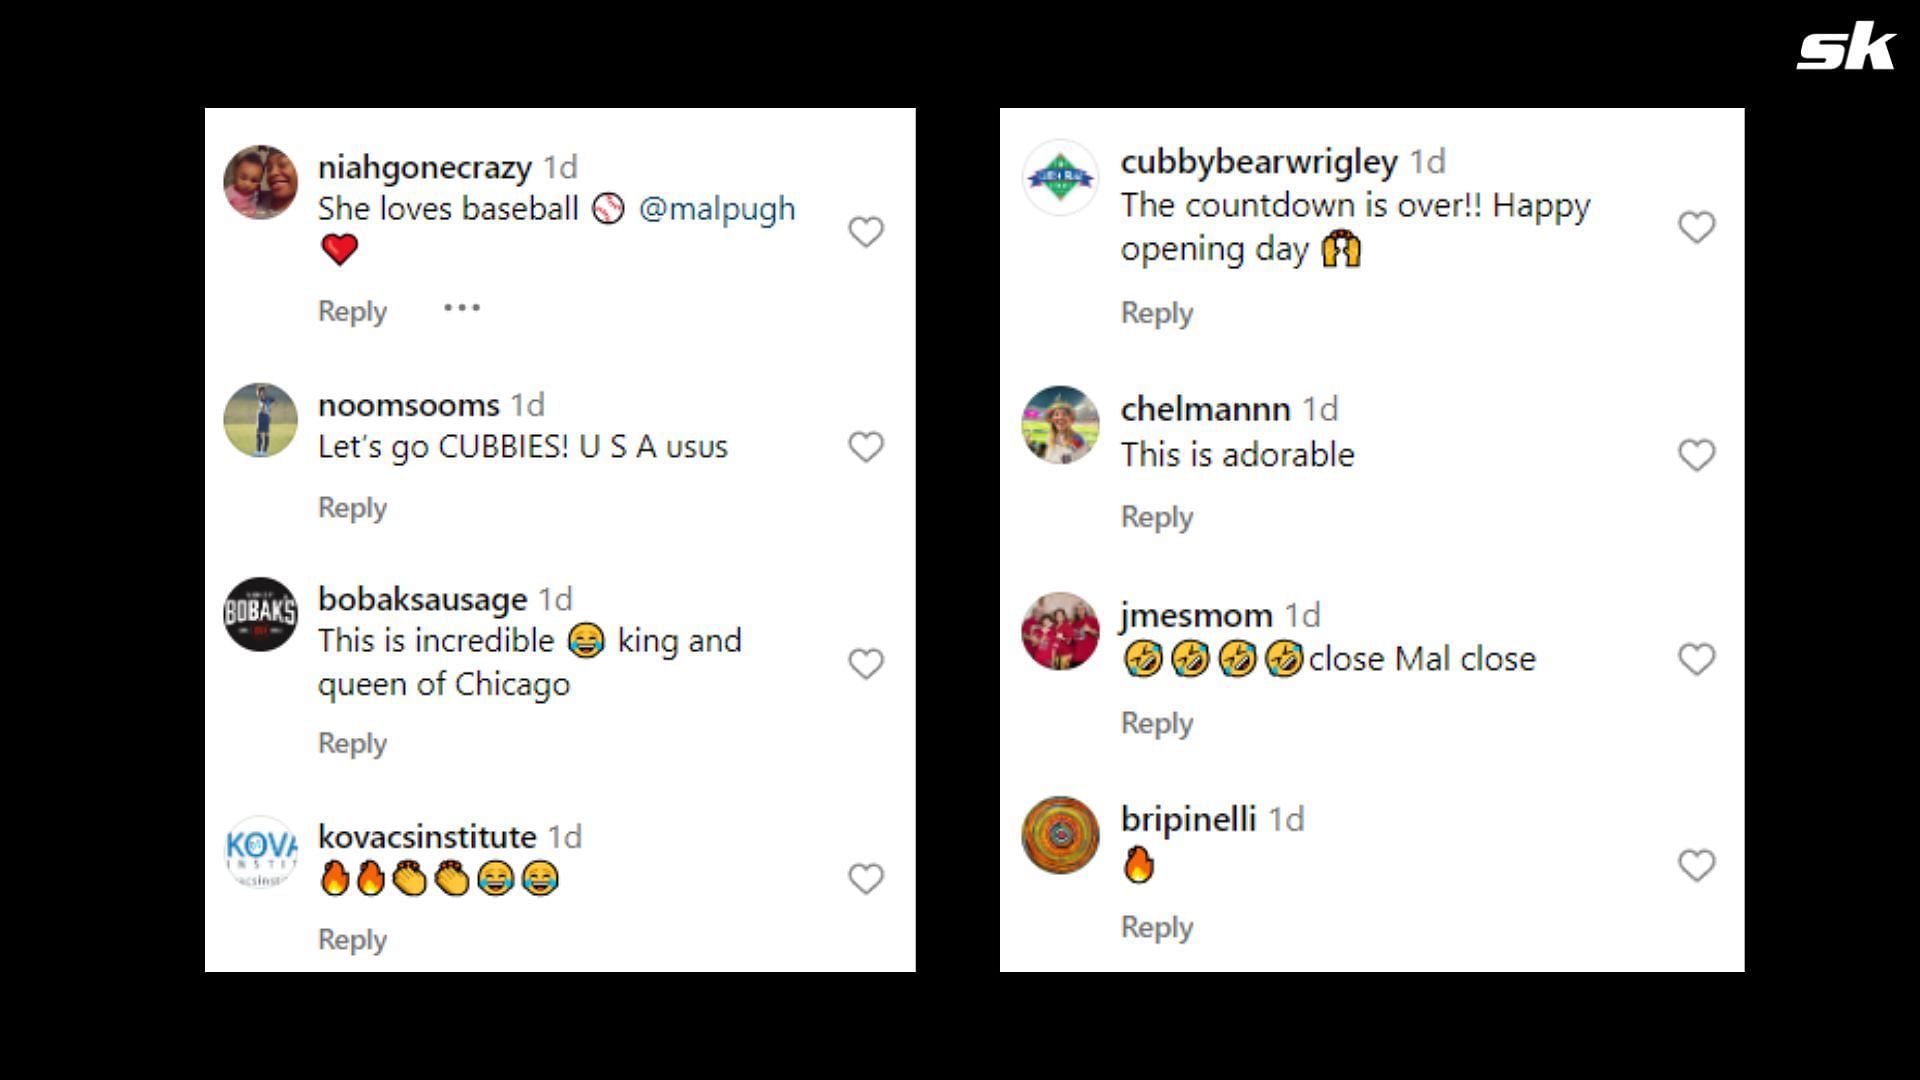 Fan reactions on the USWNT and Cubs post on Instagram